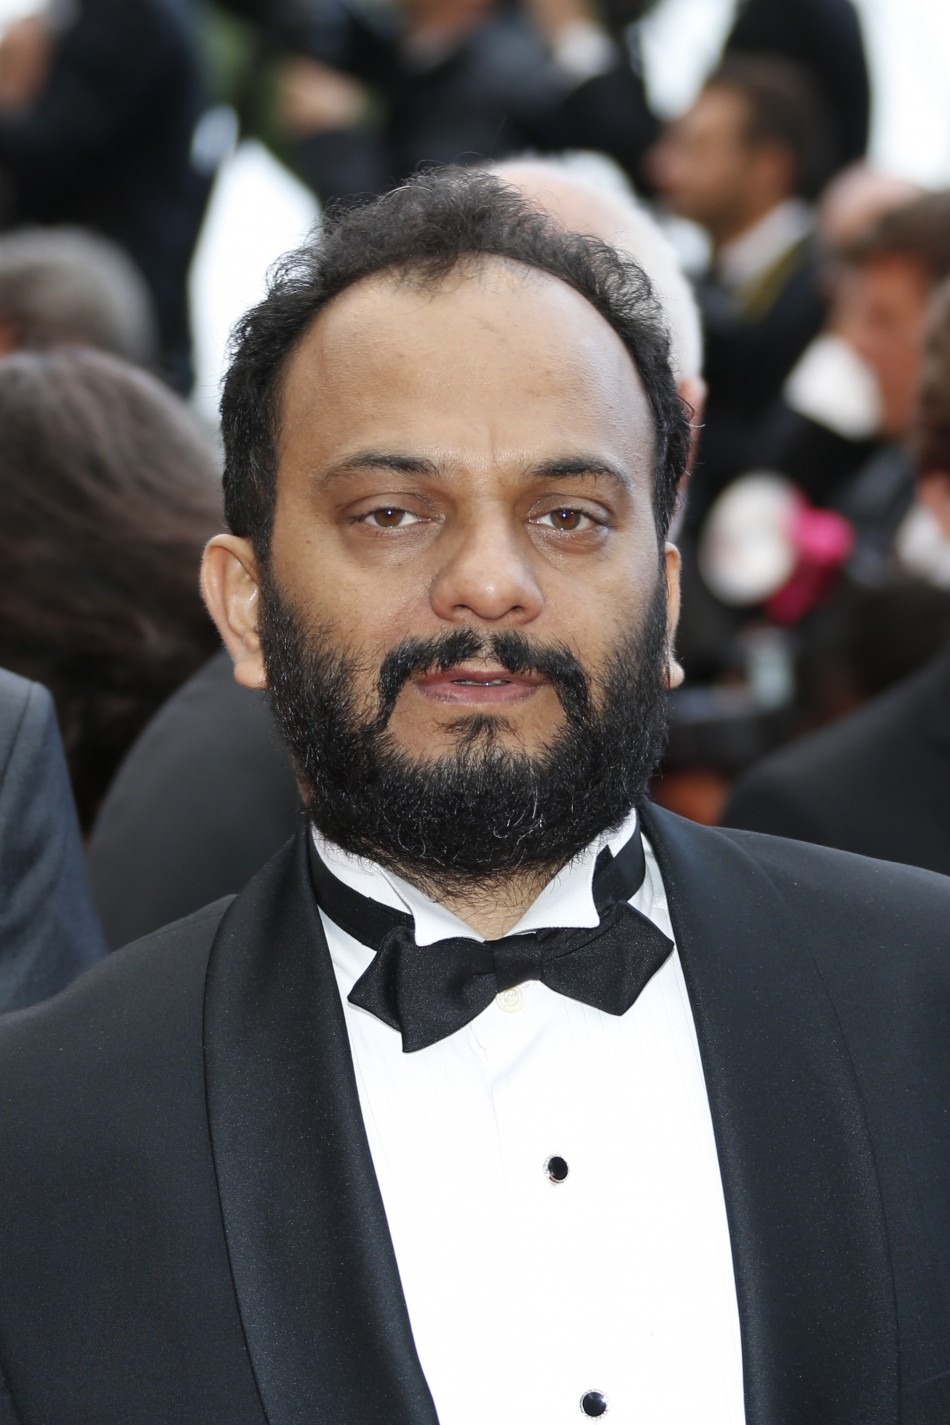 Director Amit Kumar poses on the red carpet as he arrives for the screening of the film Bombay Talkies and the evenings gala celebrating a hundred years of Indian cinema, during the 66th Cannes Film Festival in Cannes May 19, 2013.